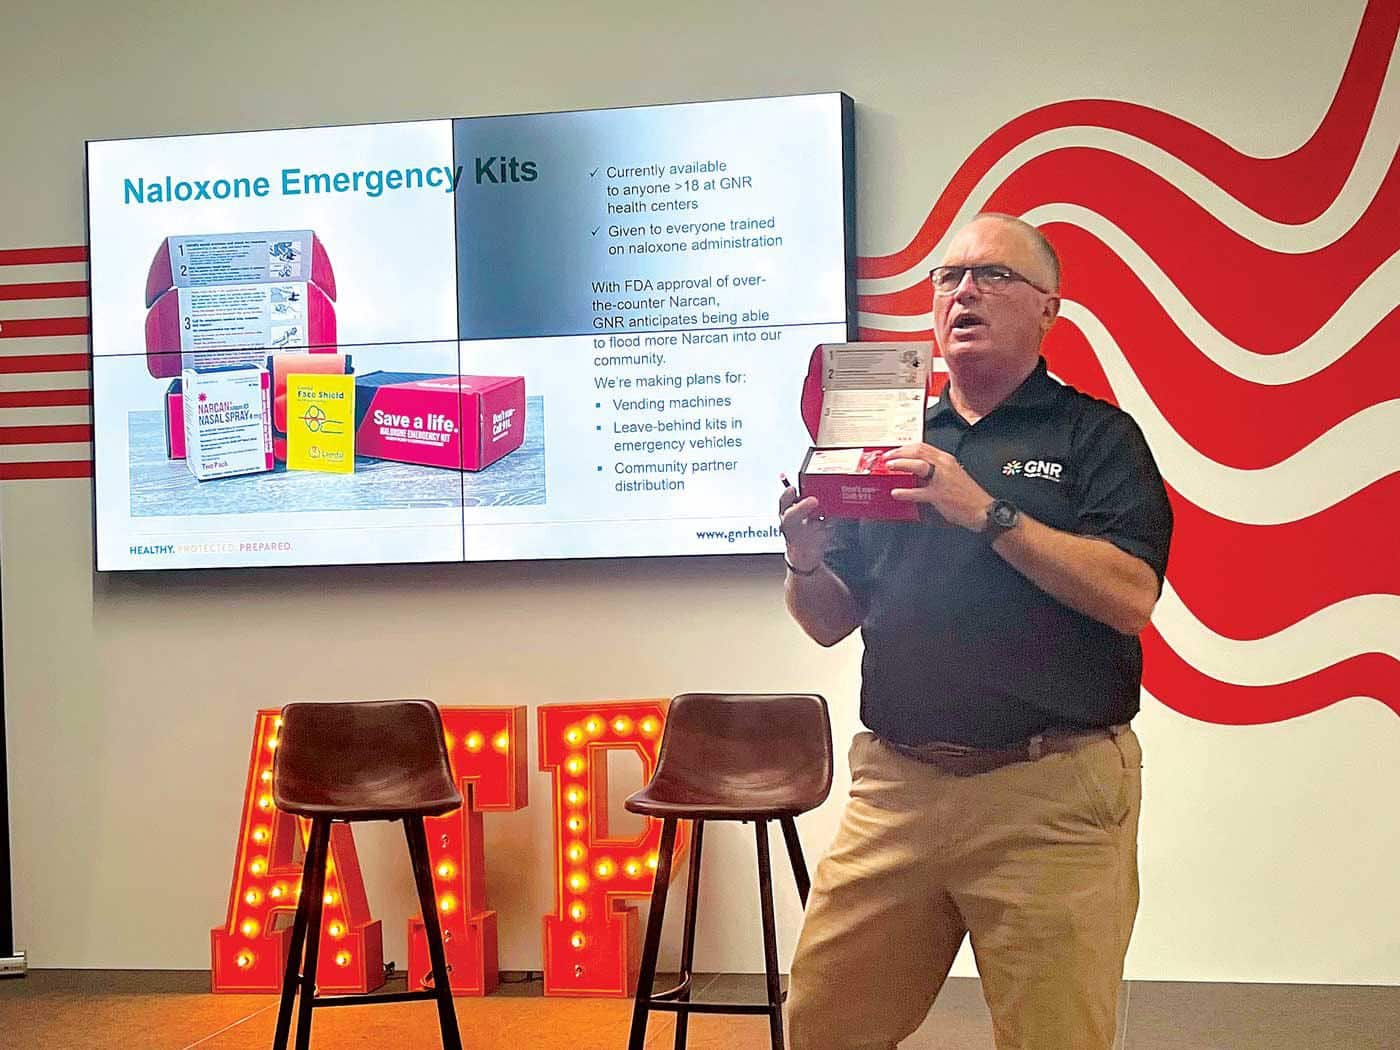 Tom Branch, opioid surveillance and prevention specialist for Gwinnett Newton Rockdale Public Health, shows the components of the Narcan kits available to the public to help prevent opioid overdoses.